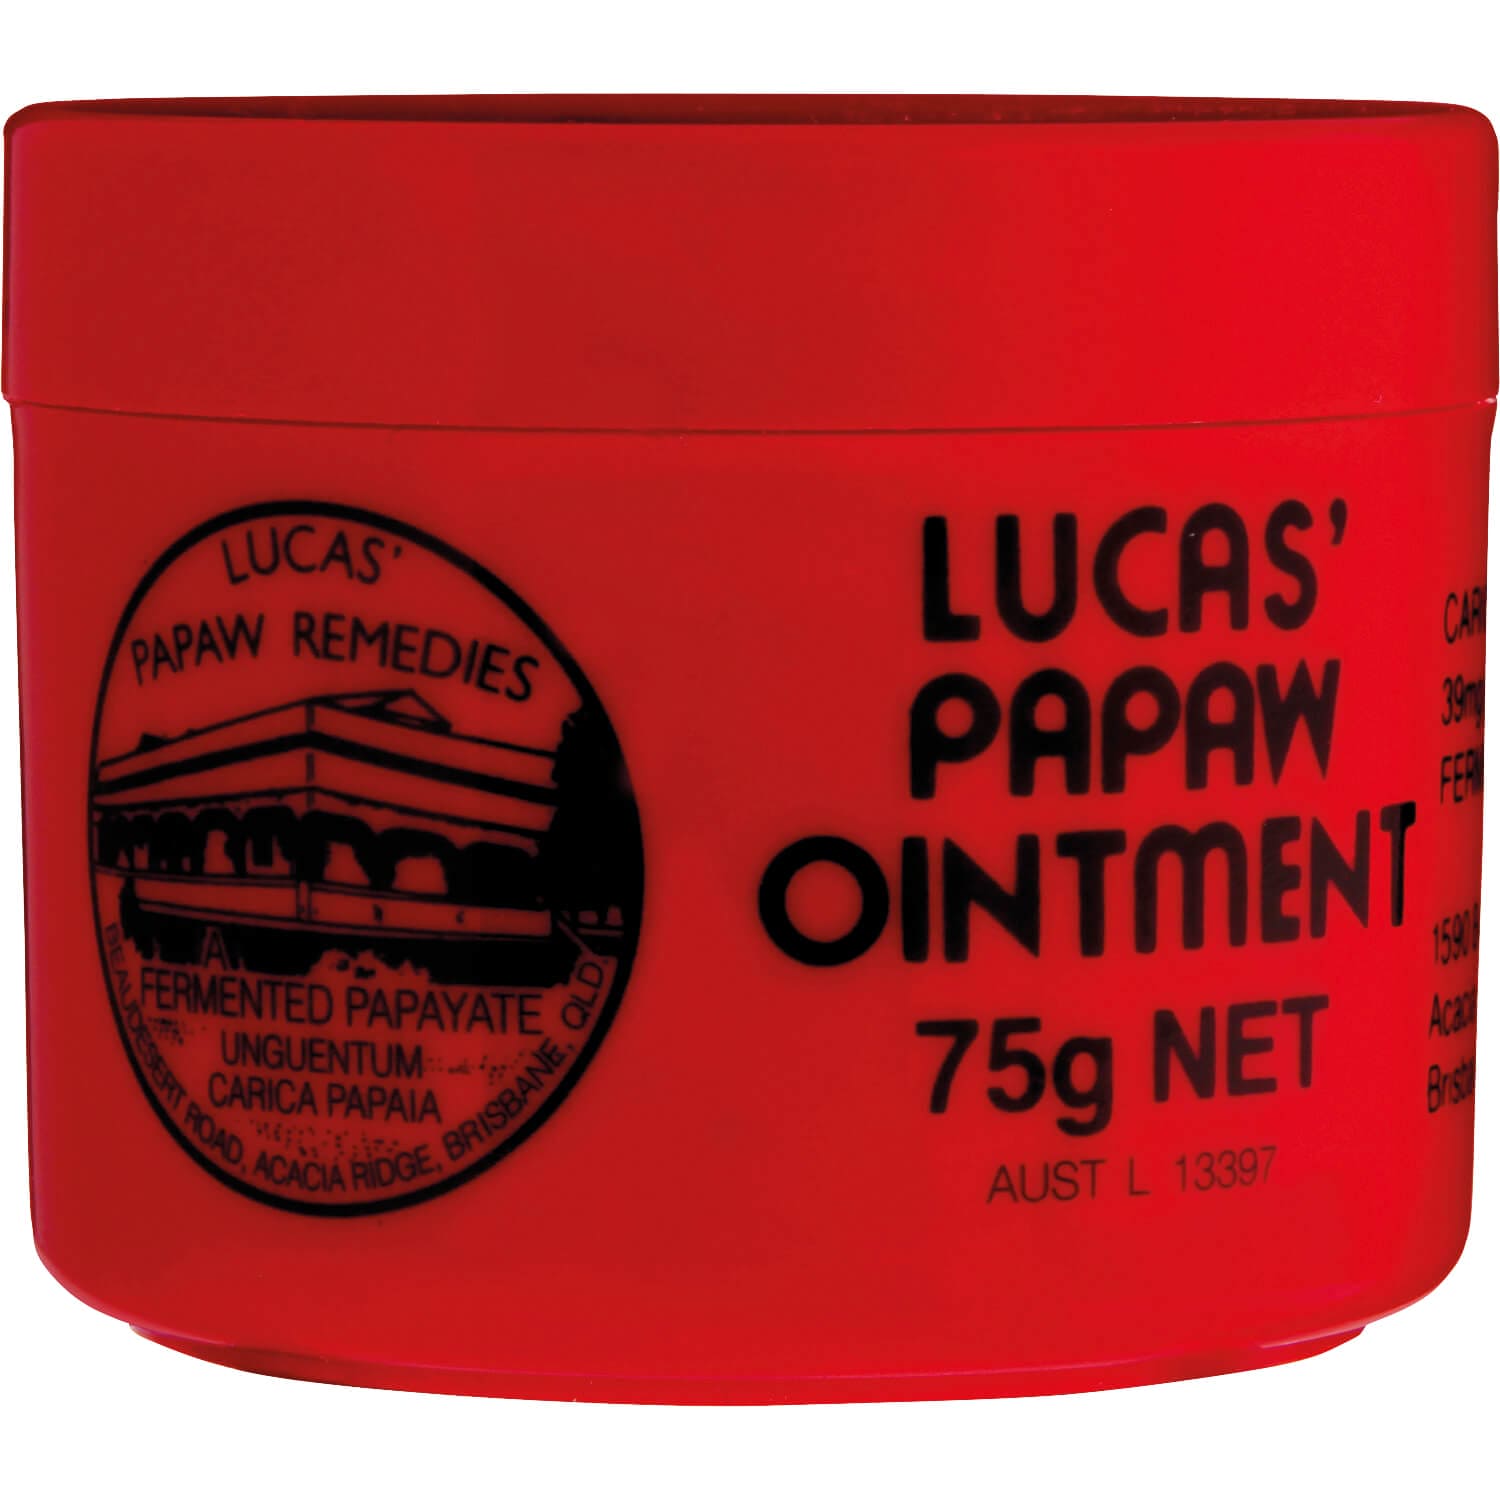 Lucas' Papaw Remedies - PRECAUTIONARY RECALL LUCAS' PAPAW OINTMENT Lucas'  Papaw Remedies, following consultation with the Therapeutic Goods  Administration, is recalling the above batches of Lucas' Papaw Ointment  (which is a topical